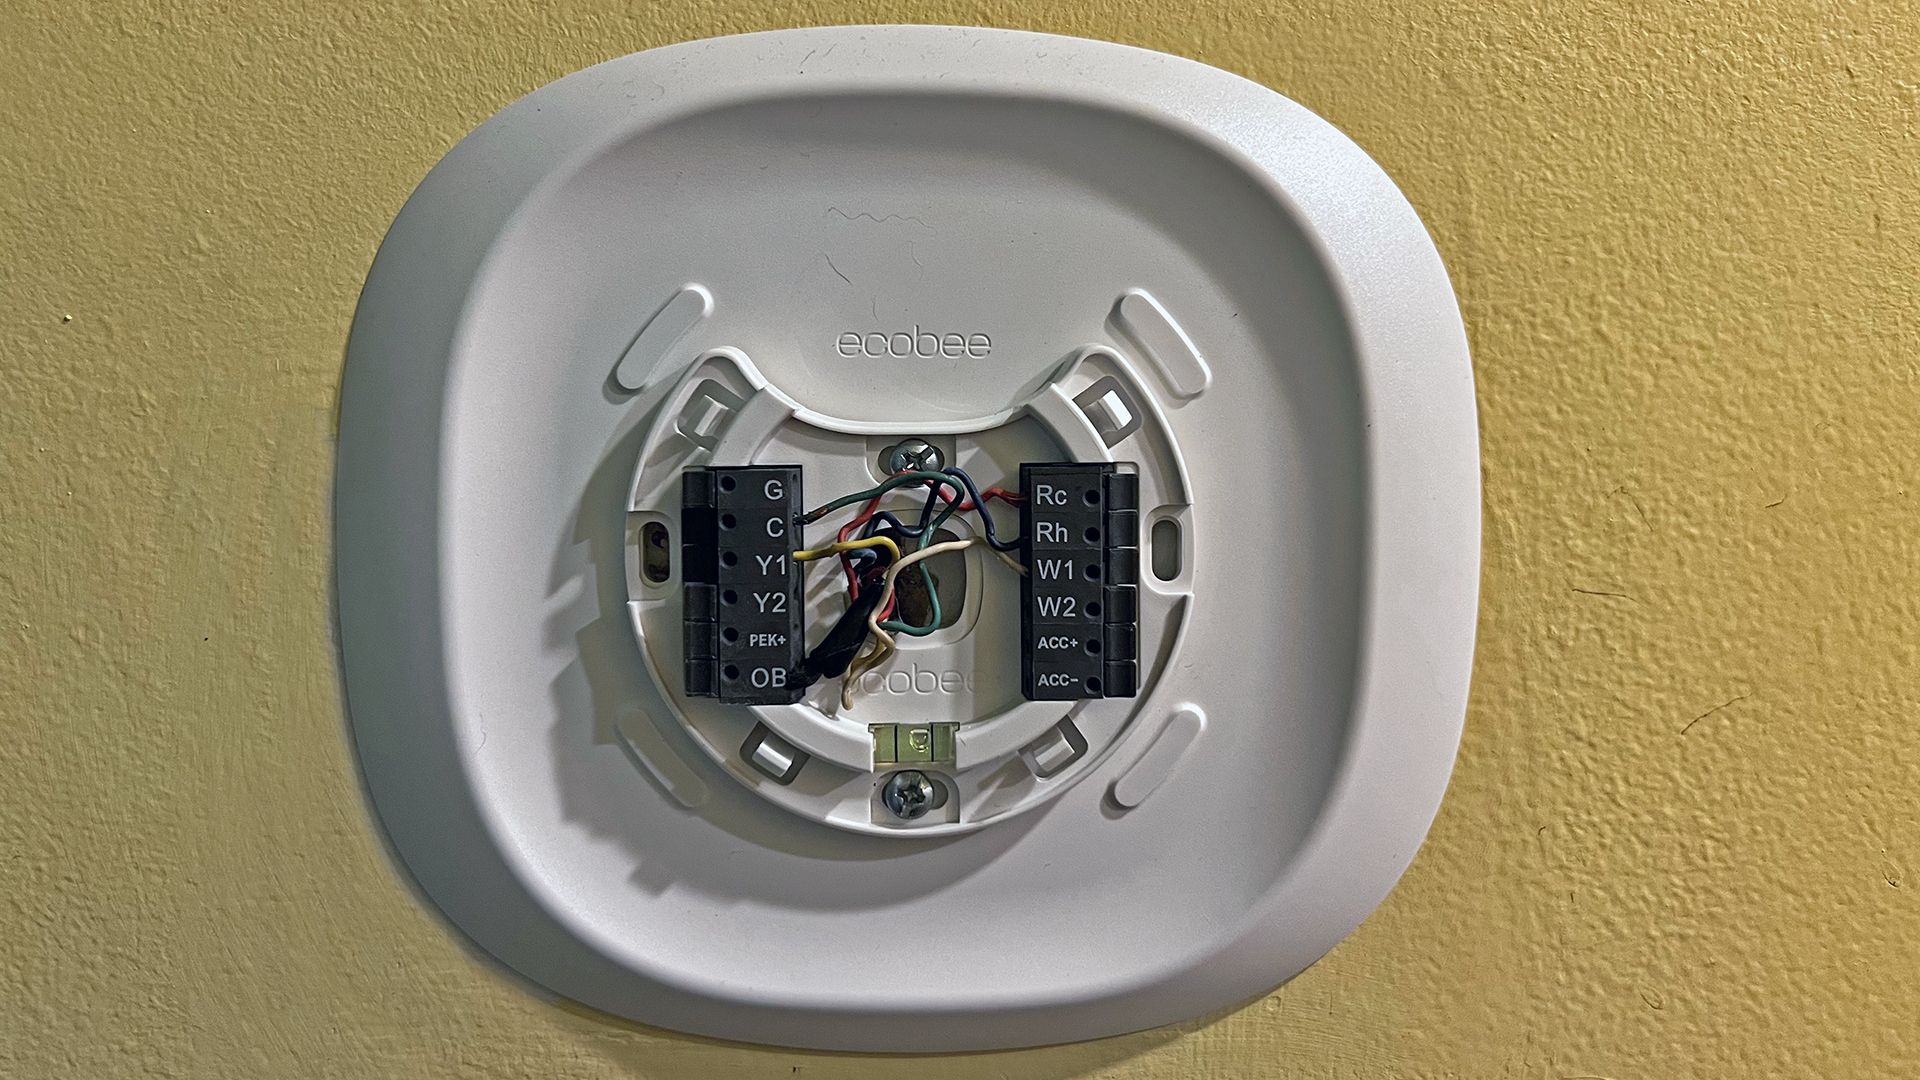 An ecobee mounting plate with wiring showing